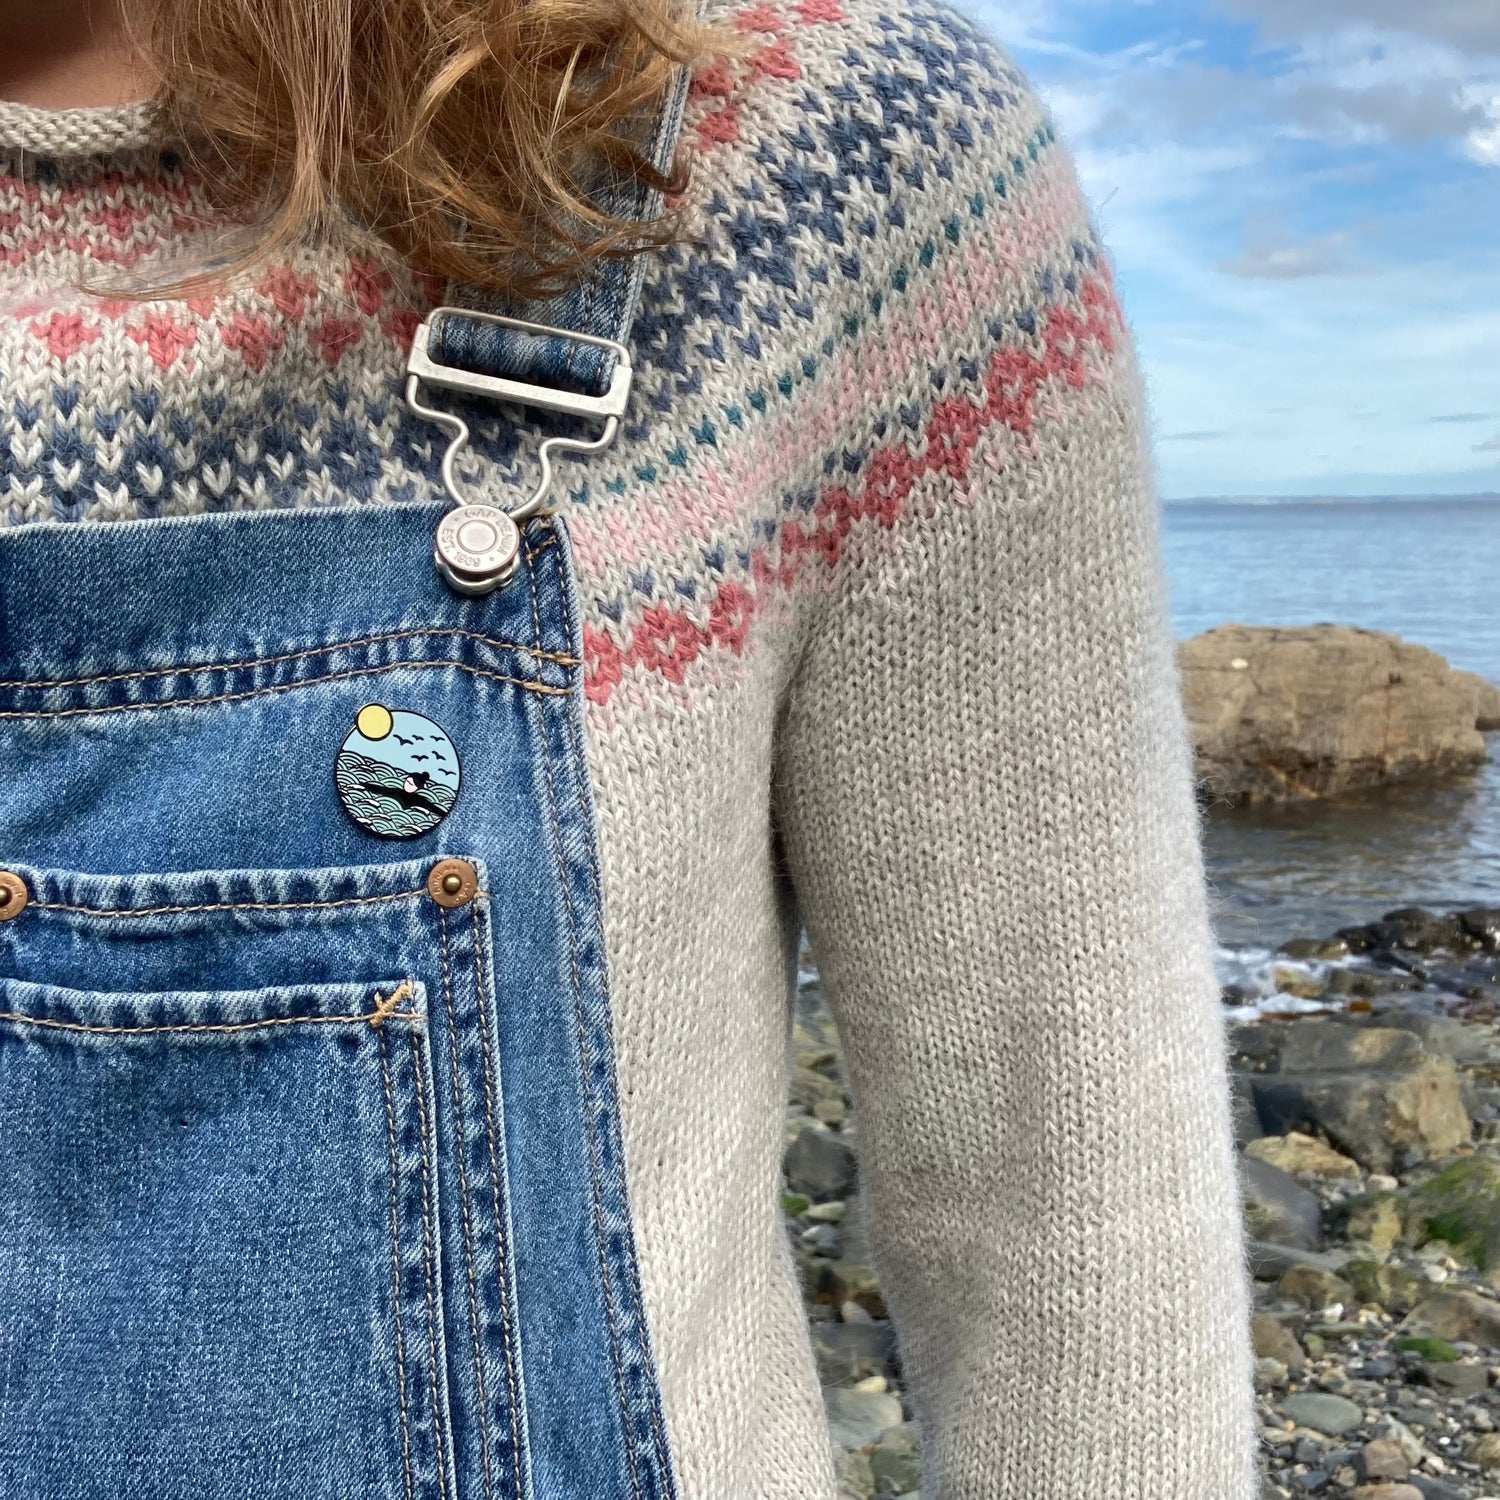 Close up of wild swimming enamel pin badge, attached to a pair of denim dungarees with a handknit fairisle jumper underneath. The sea can be seen behind the figure.